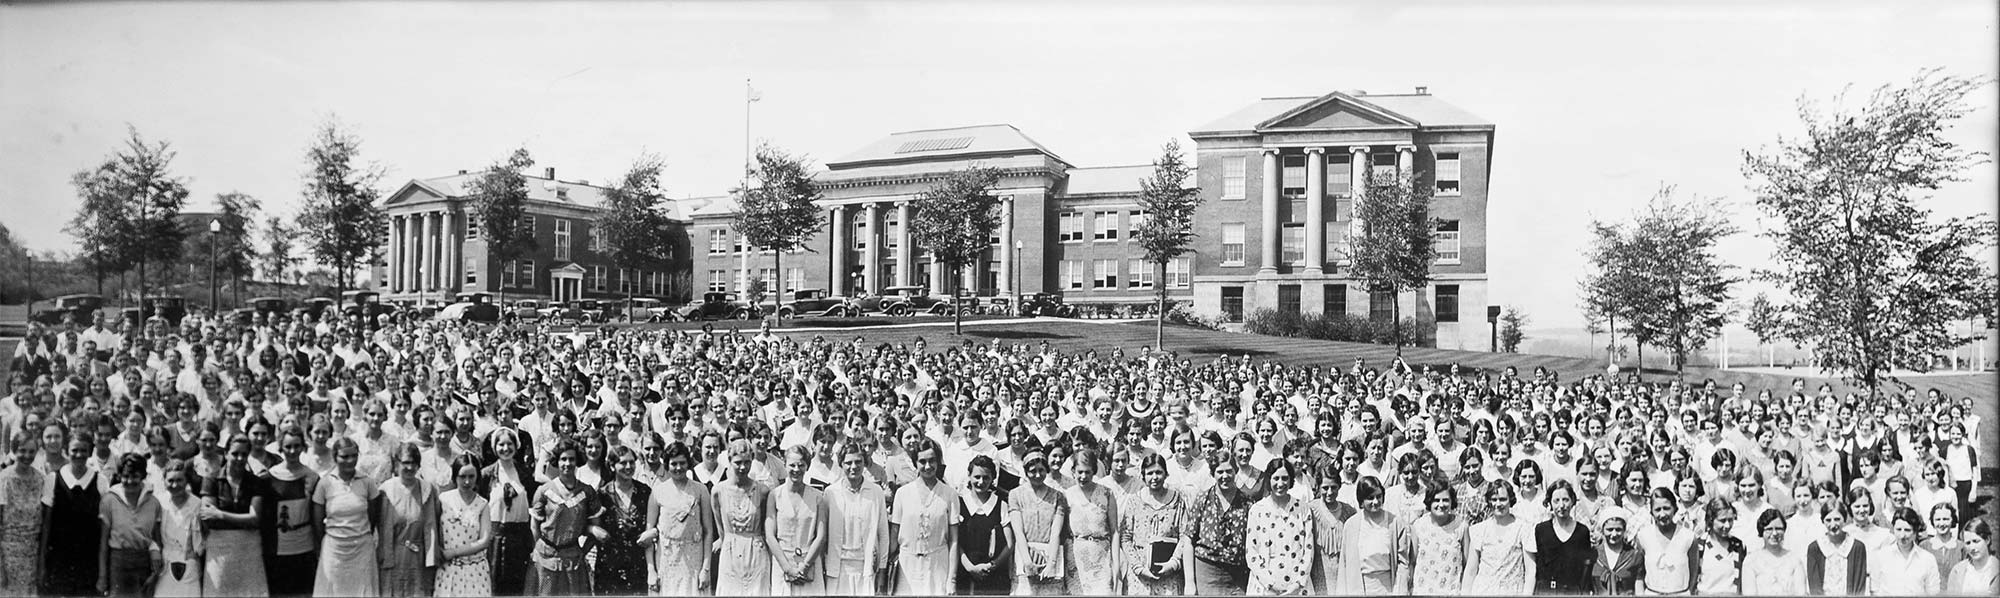 Old Commencement photo with graduates in front of Old Main